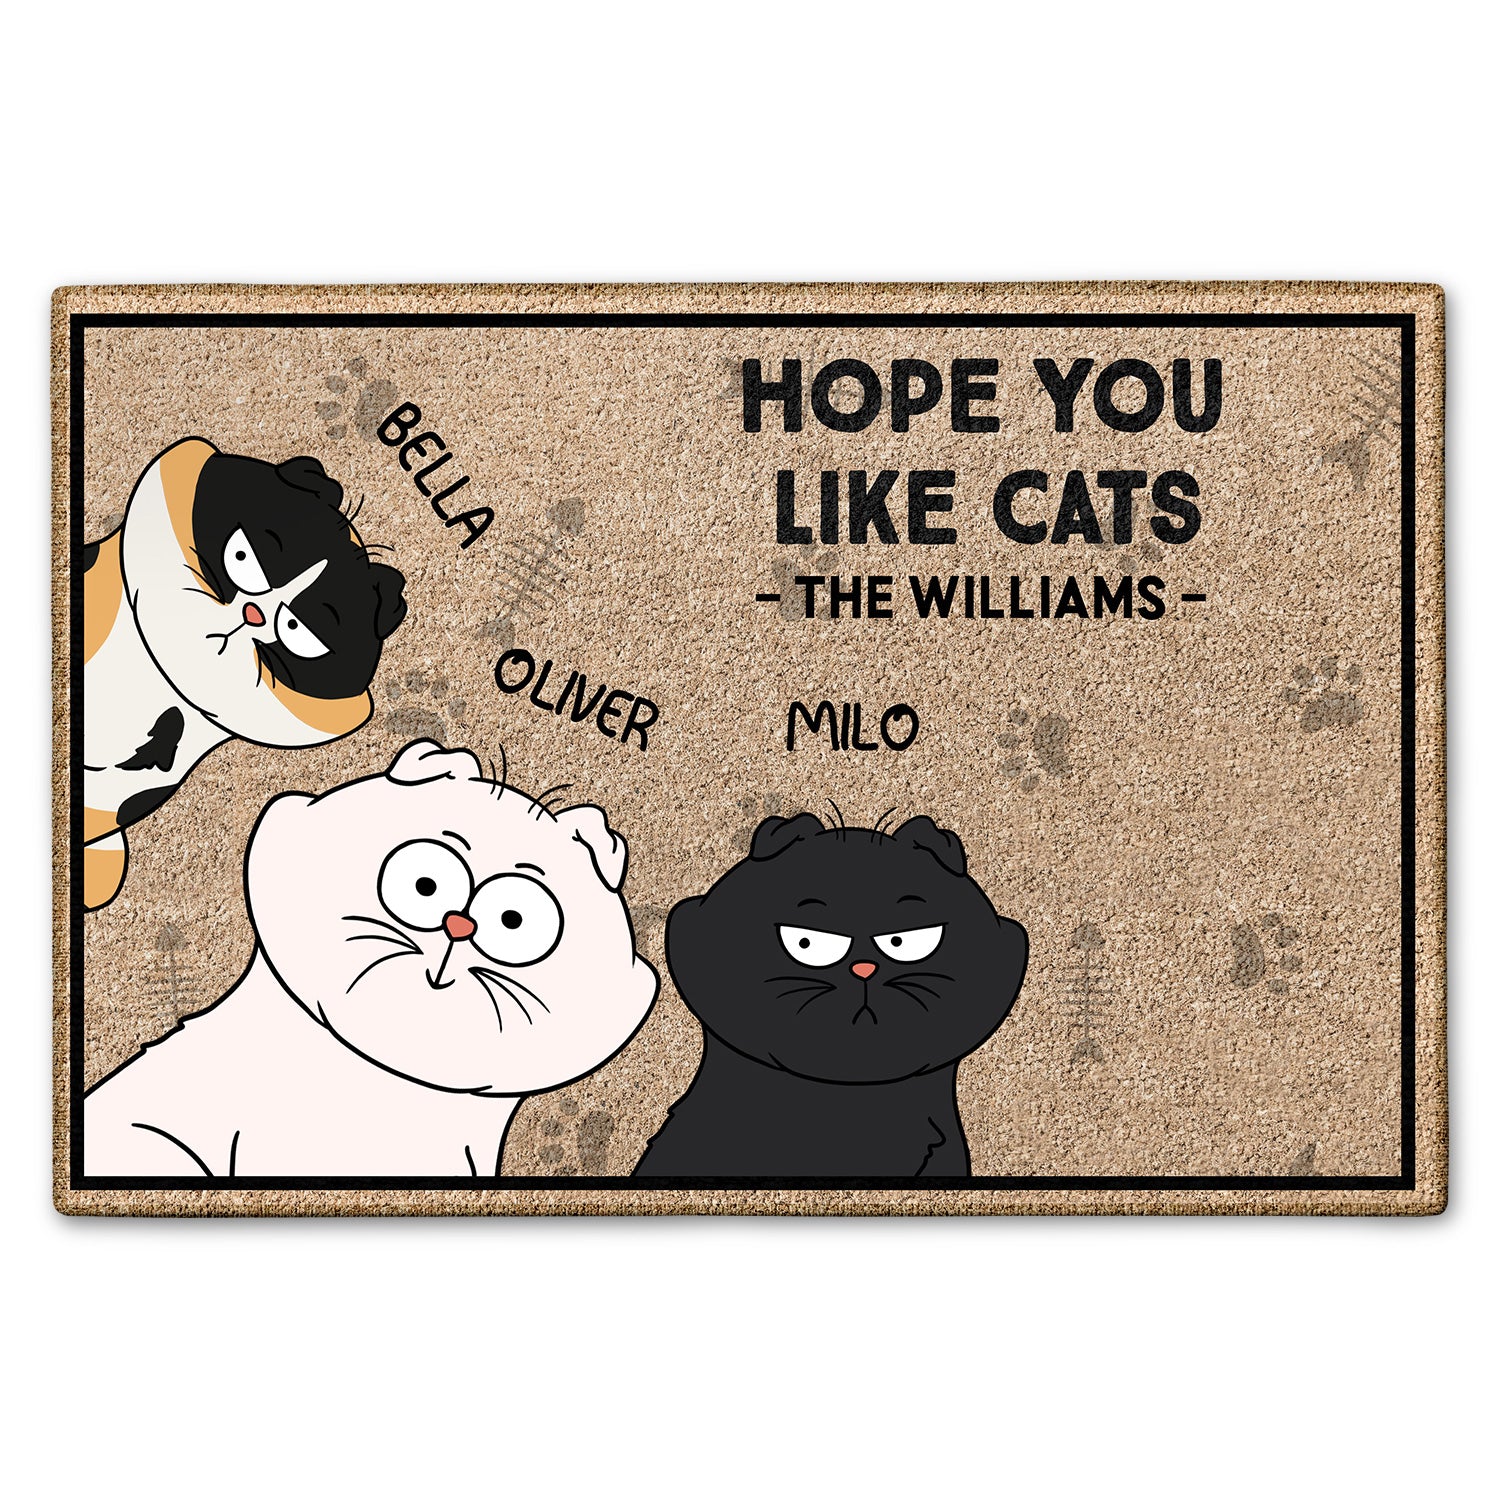 Hope You Like Cats - Birthday, Loving, Funny, Home Decor Gift For Cat Lovers - Personalized Doormat